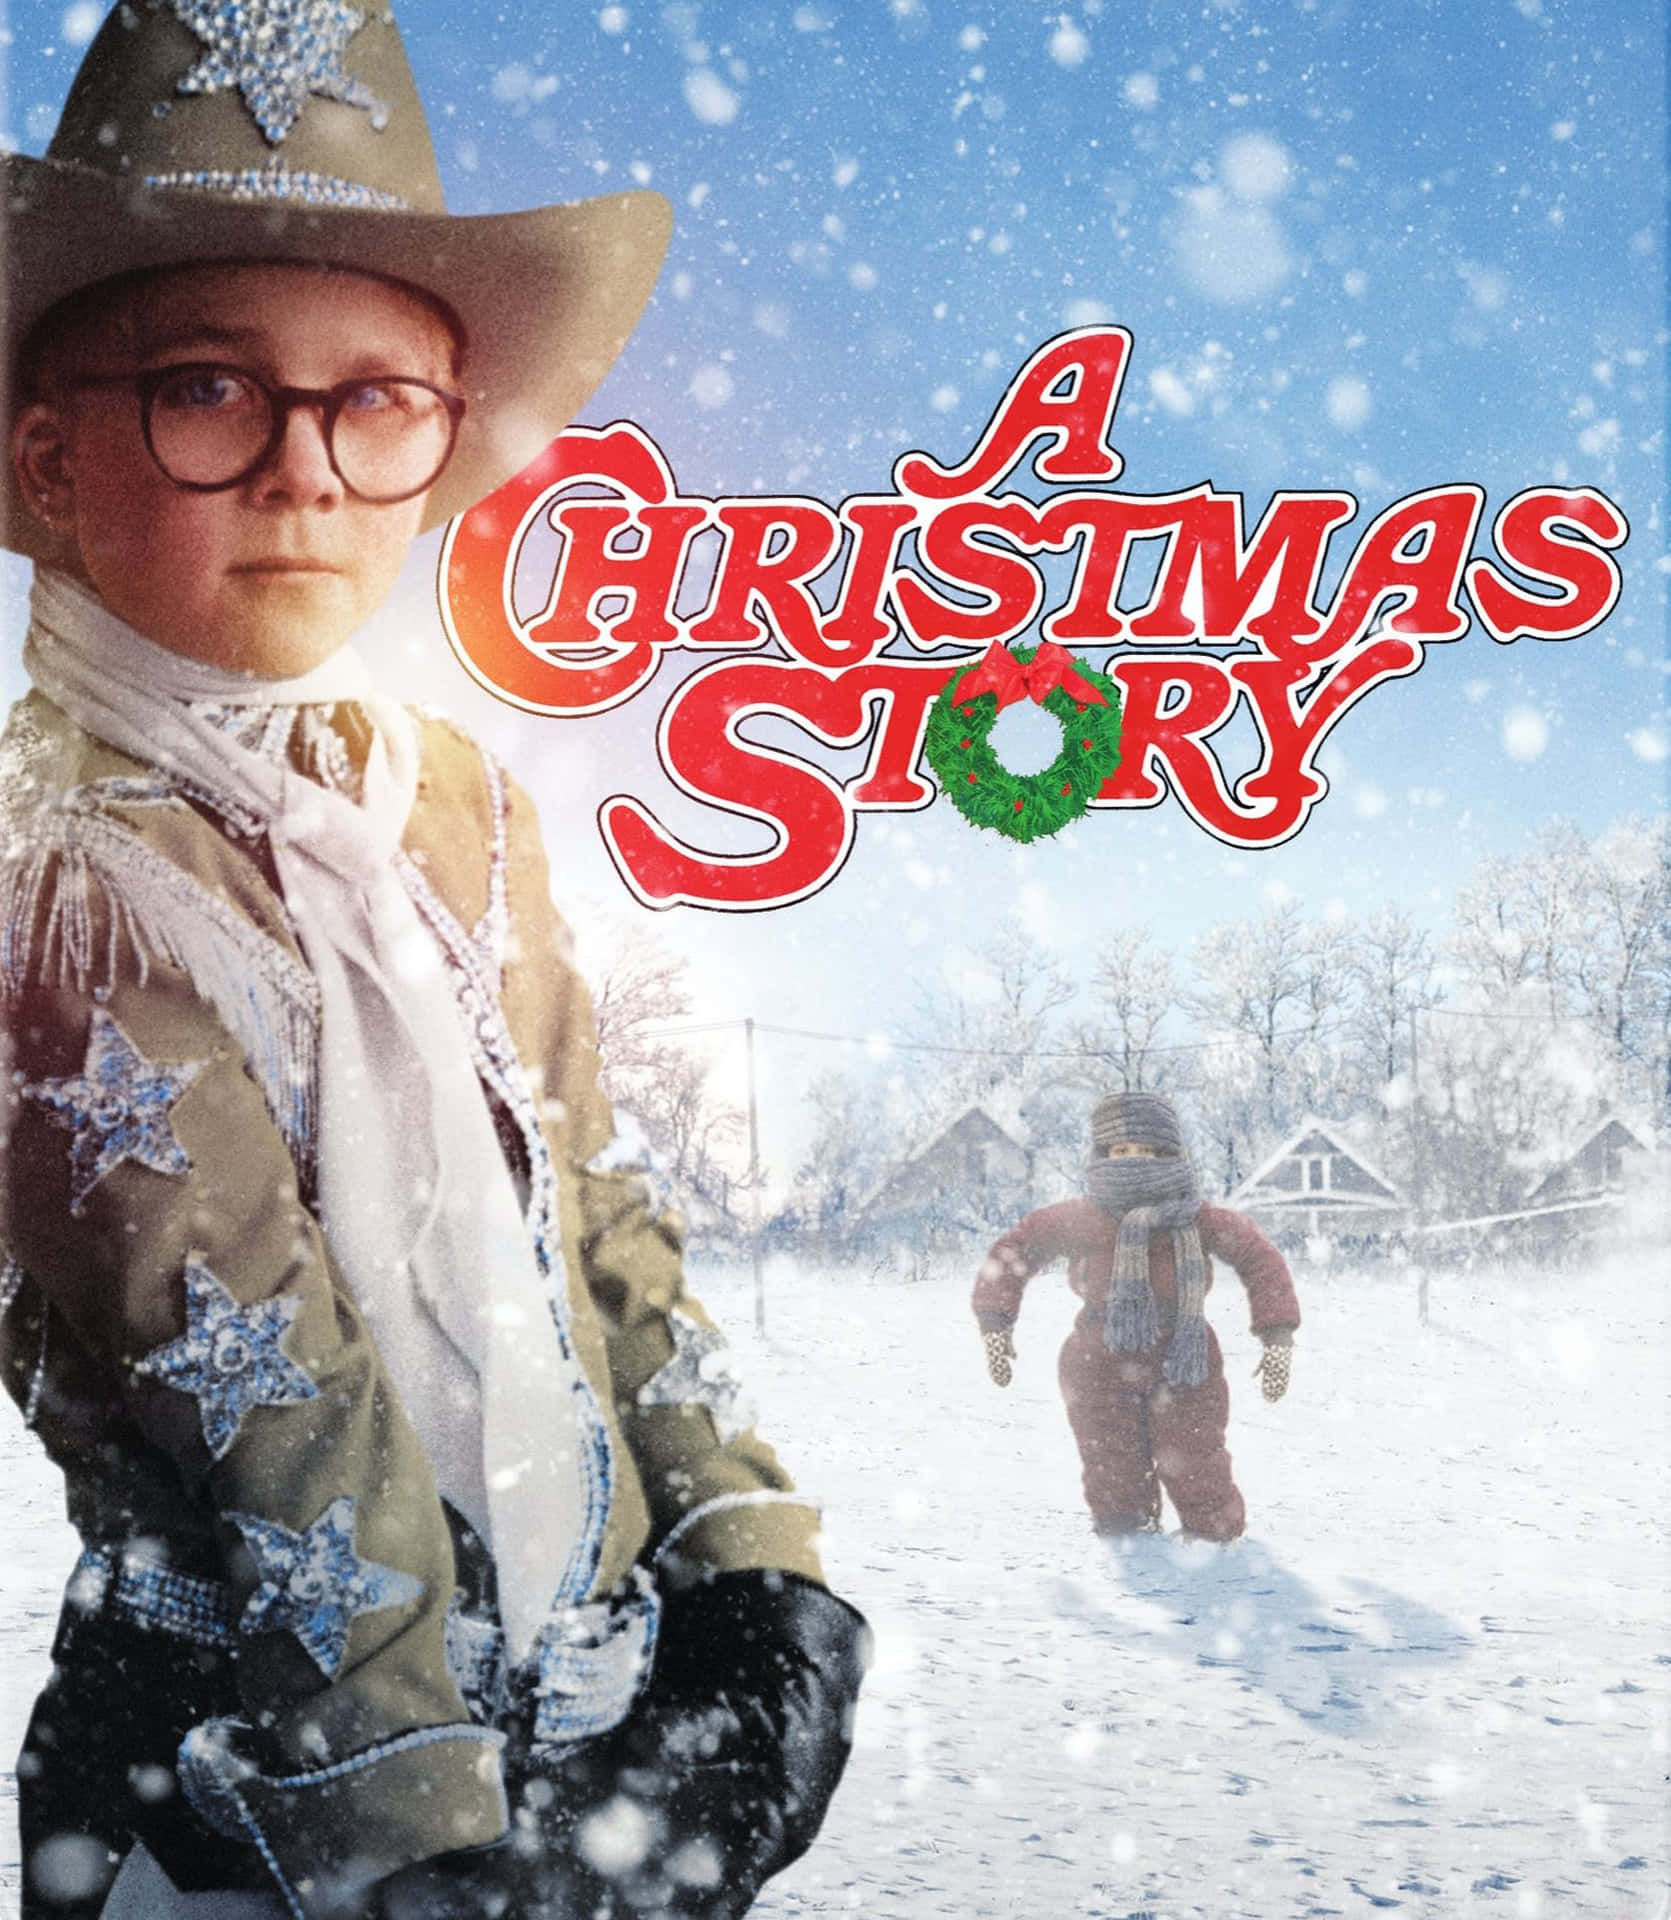 A Christmas Story Poster With A Boy In A Cowboy Hat Wallpaper